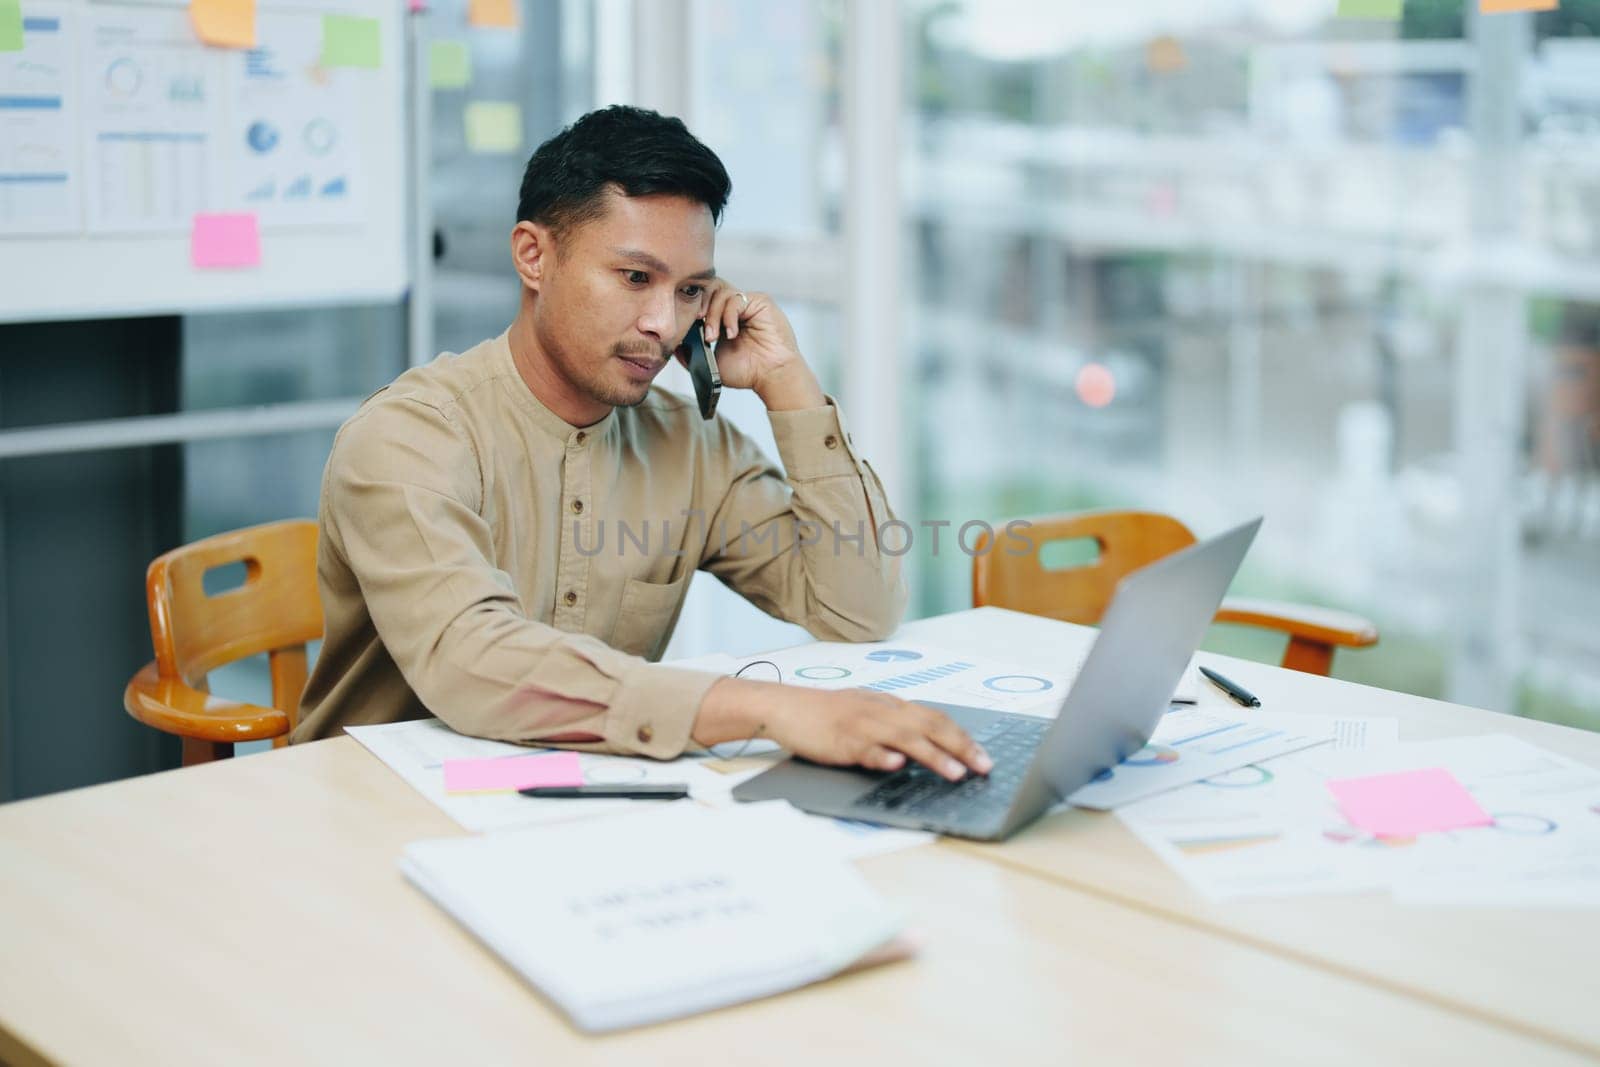 business owner or Asian male marketers are using business phones and computers to do office work.